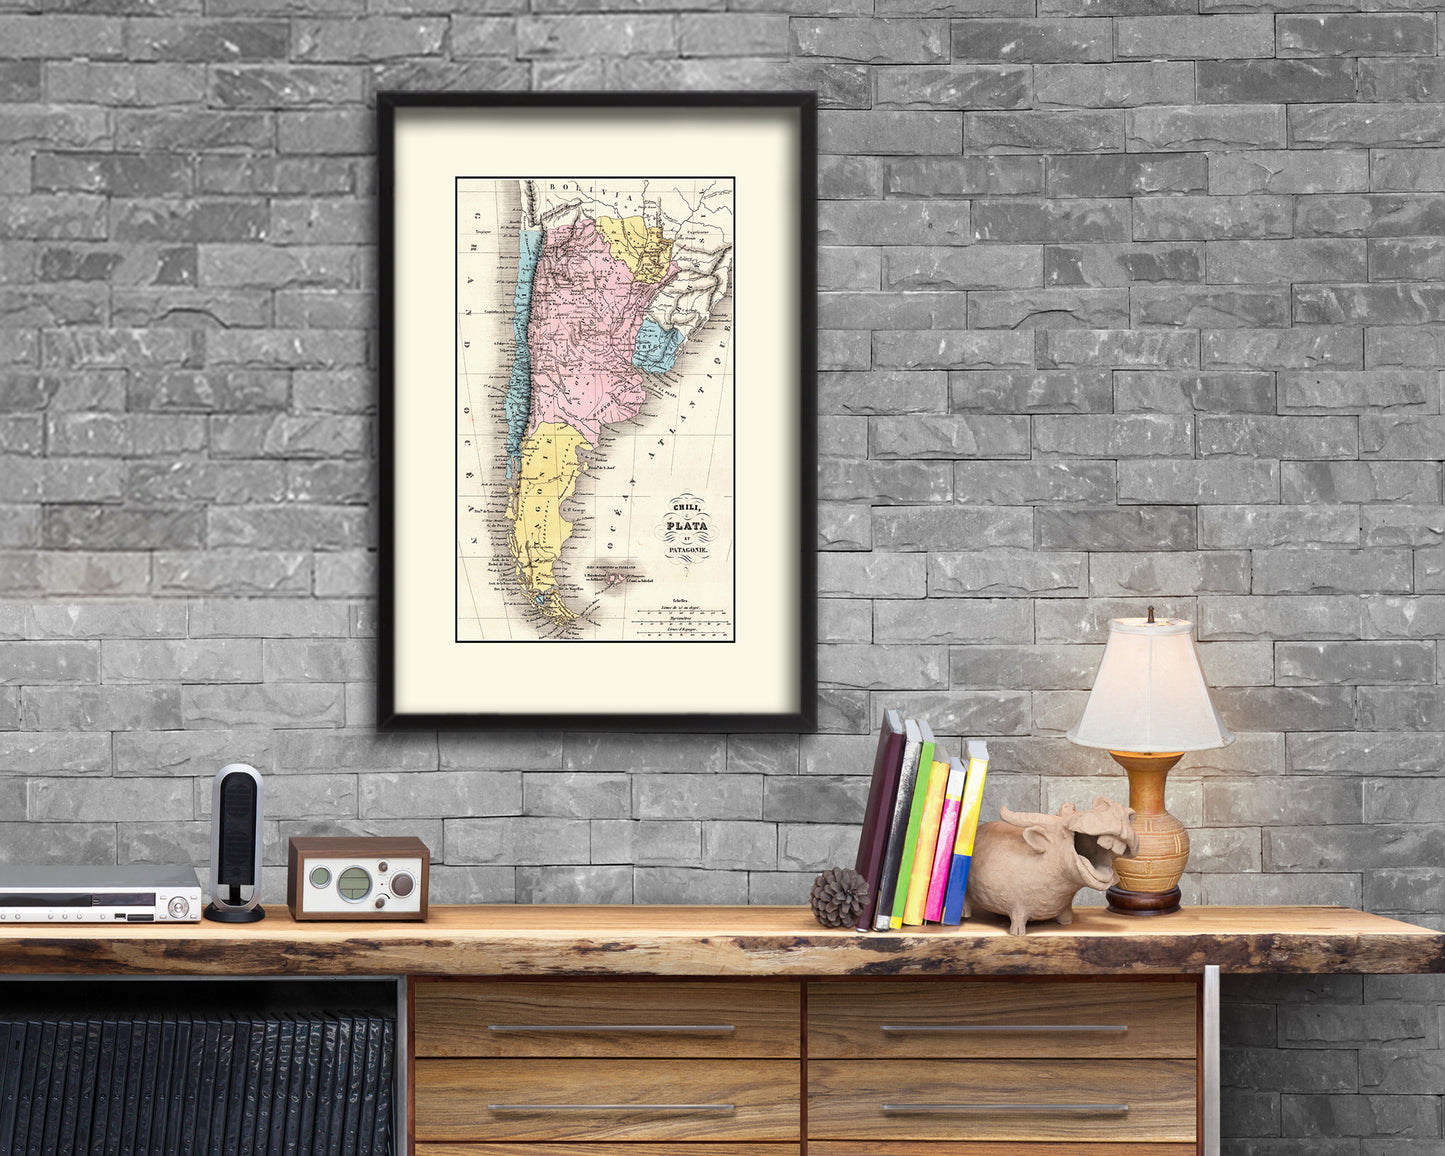 Argentina Chile Patagonia Old Map Wood Framed Print Art Wall Decor Gifts